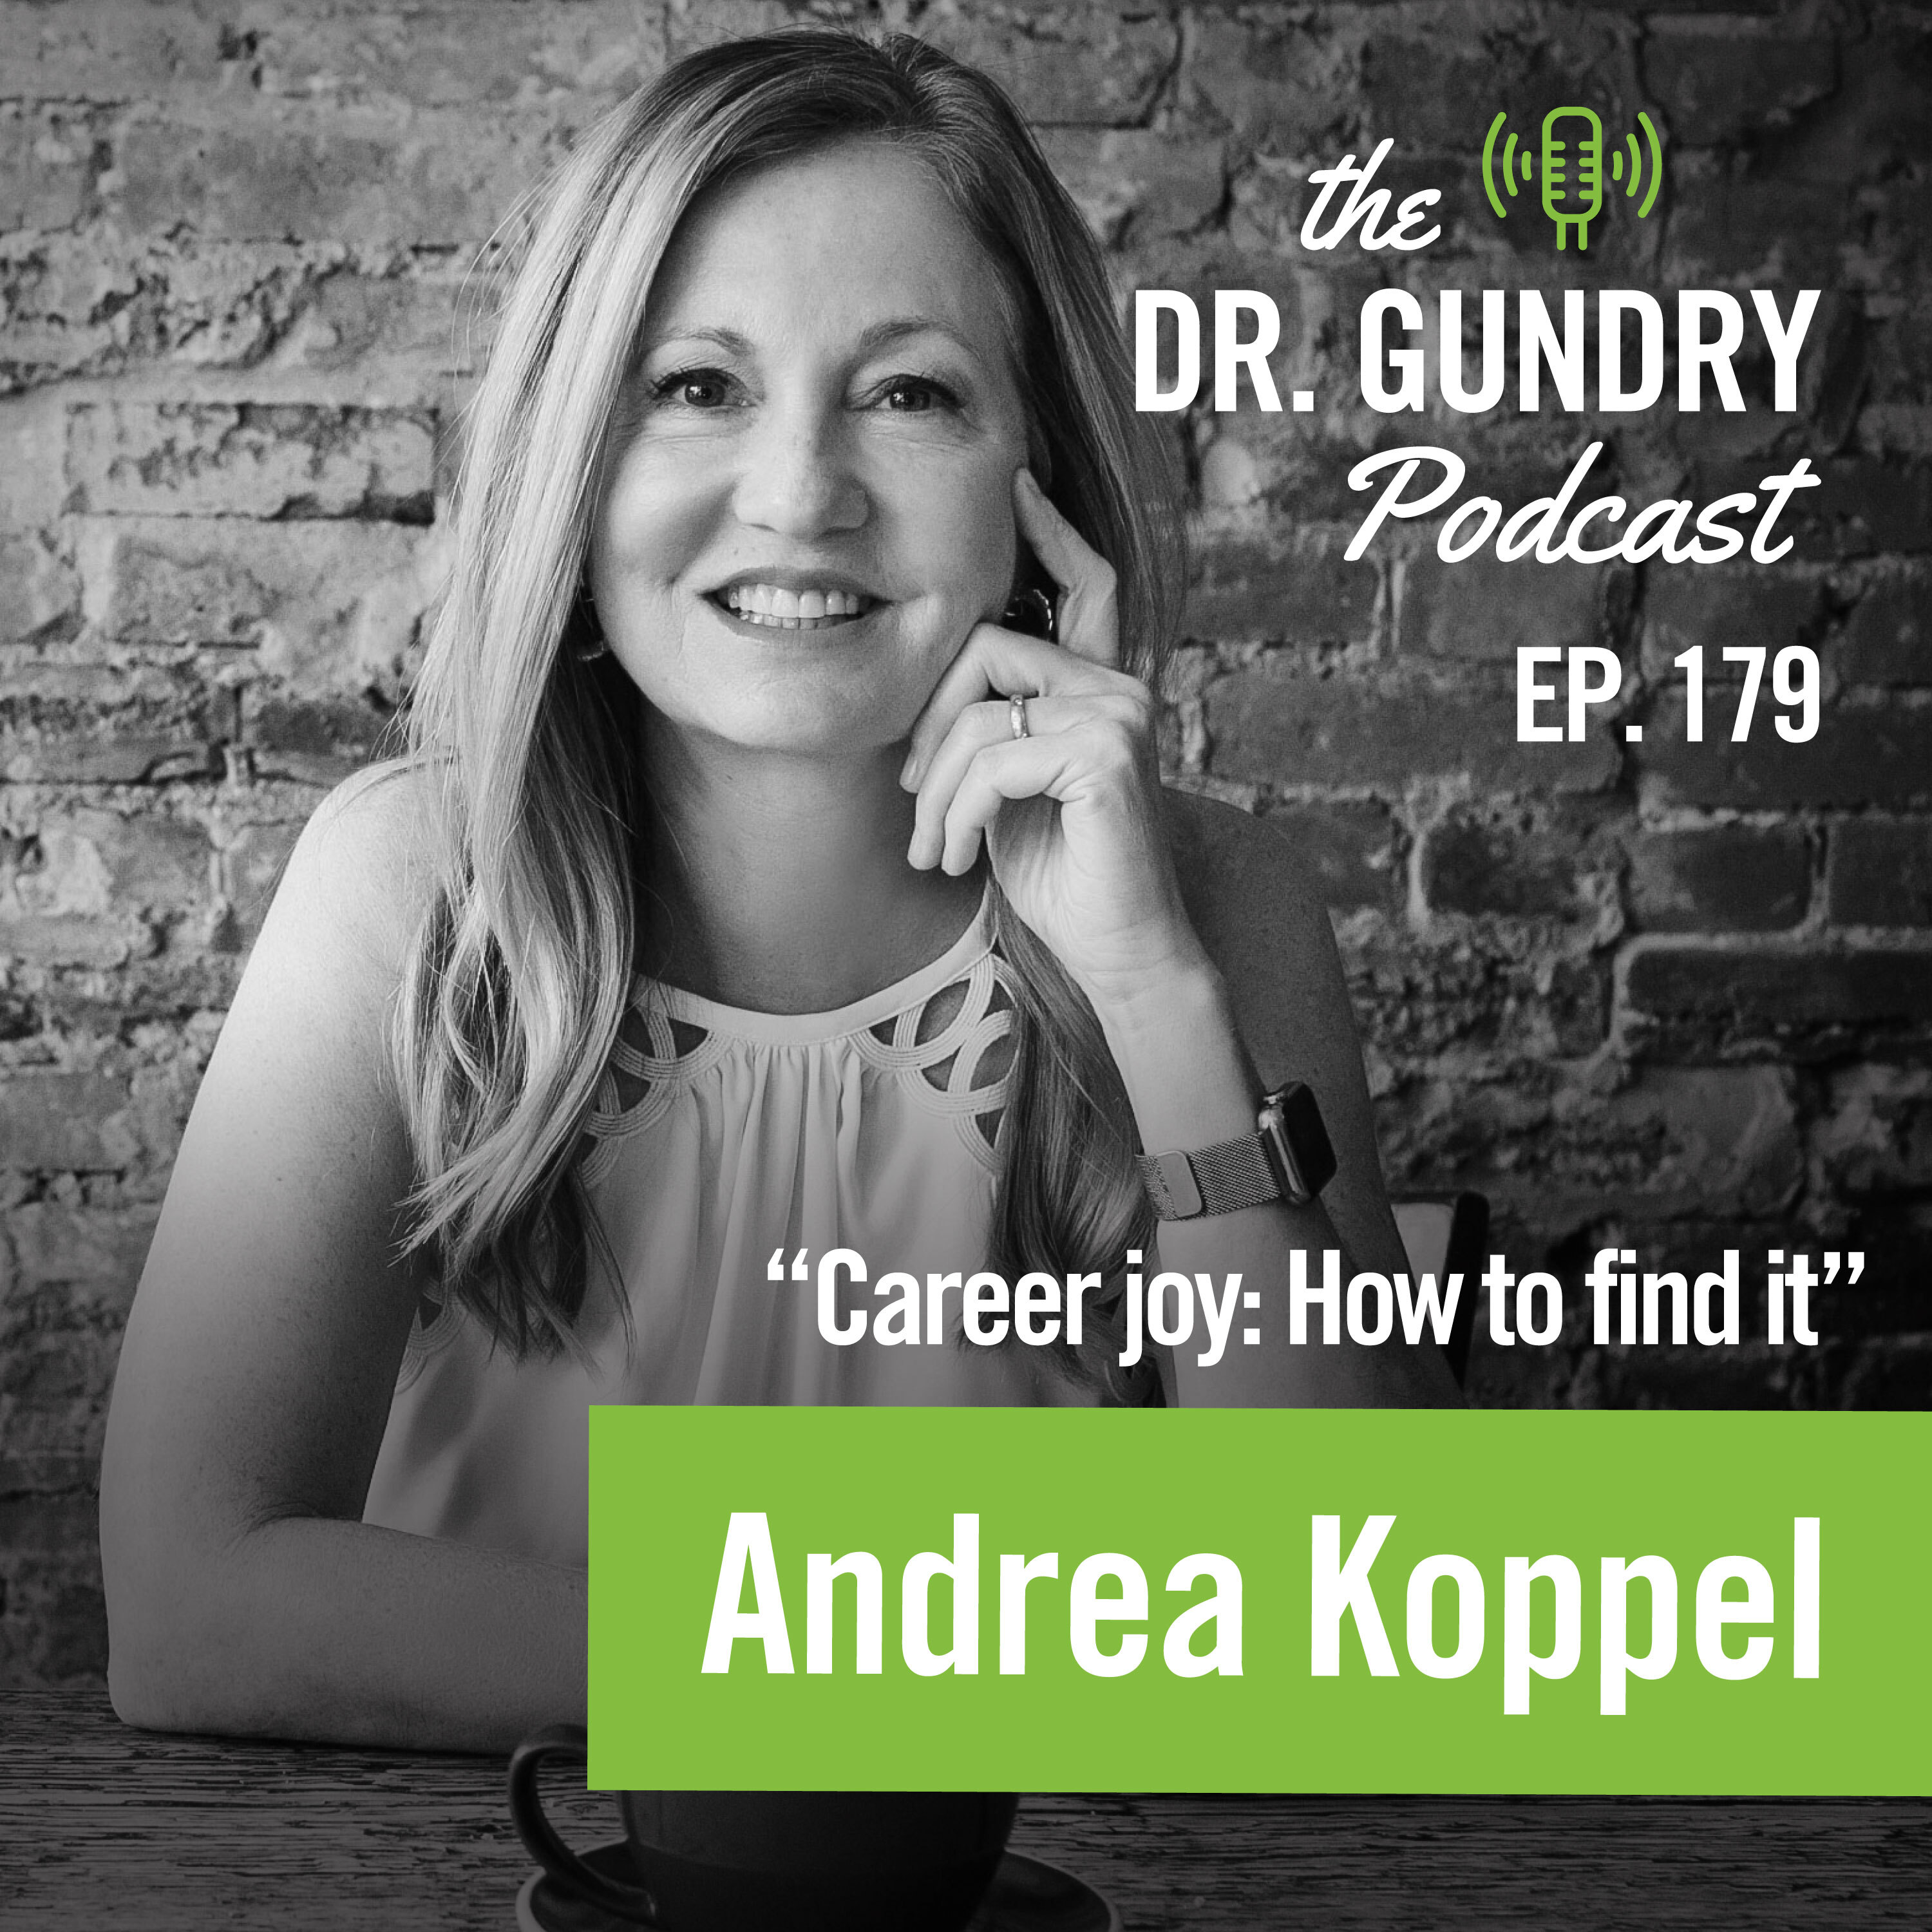 Andrea Koppel And Dr. Gundry Reveal the Secrets to Professional Pivoting